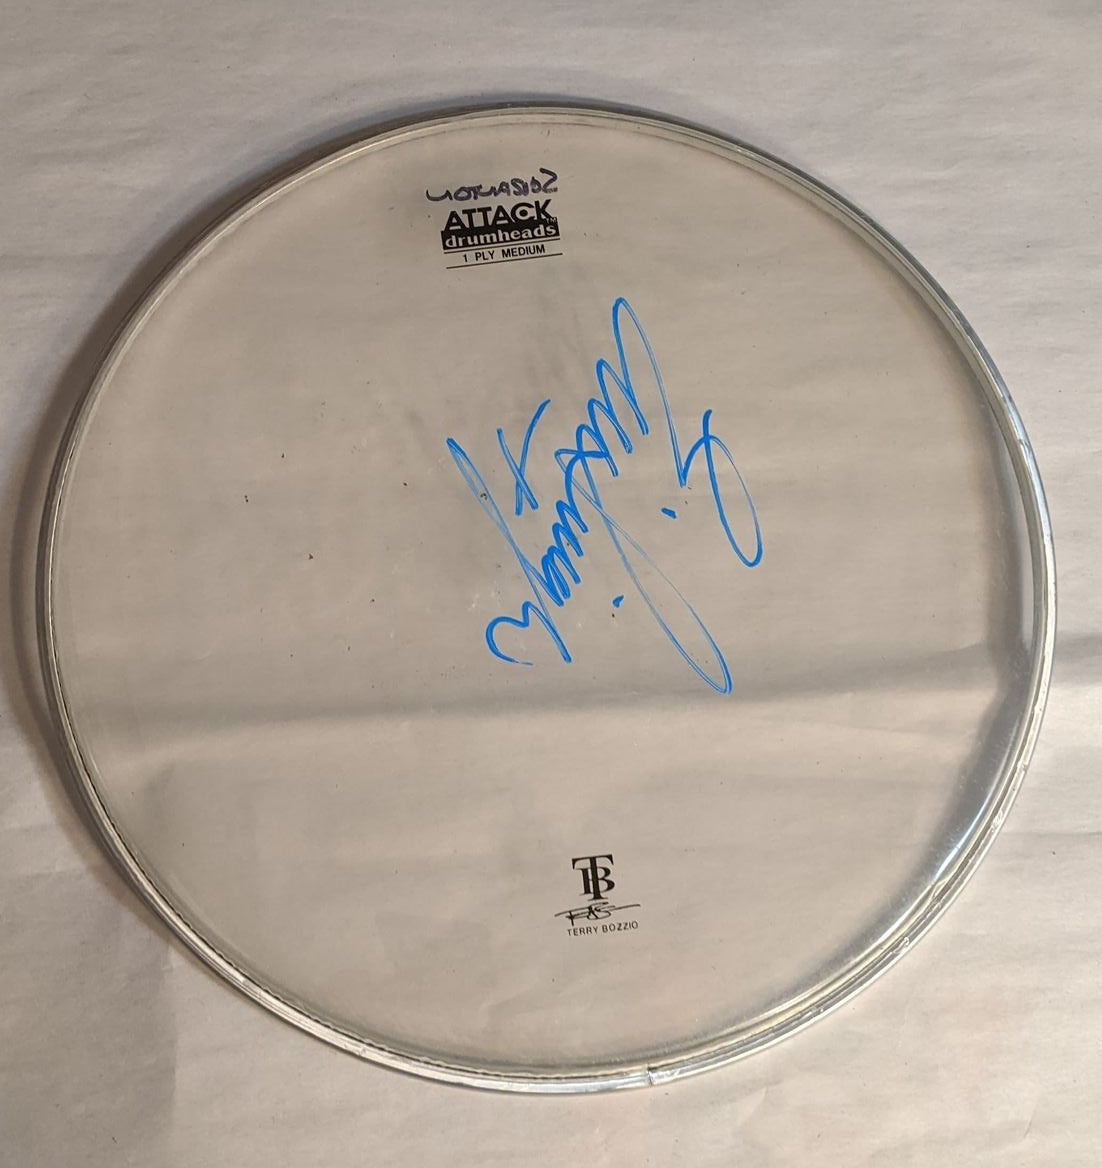 SCRANTON 9-18-2012  ERIC SINGER Stage-Used Signed drumheads